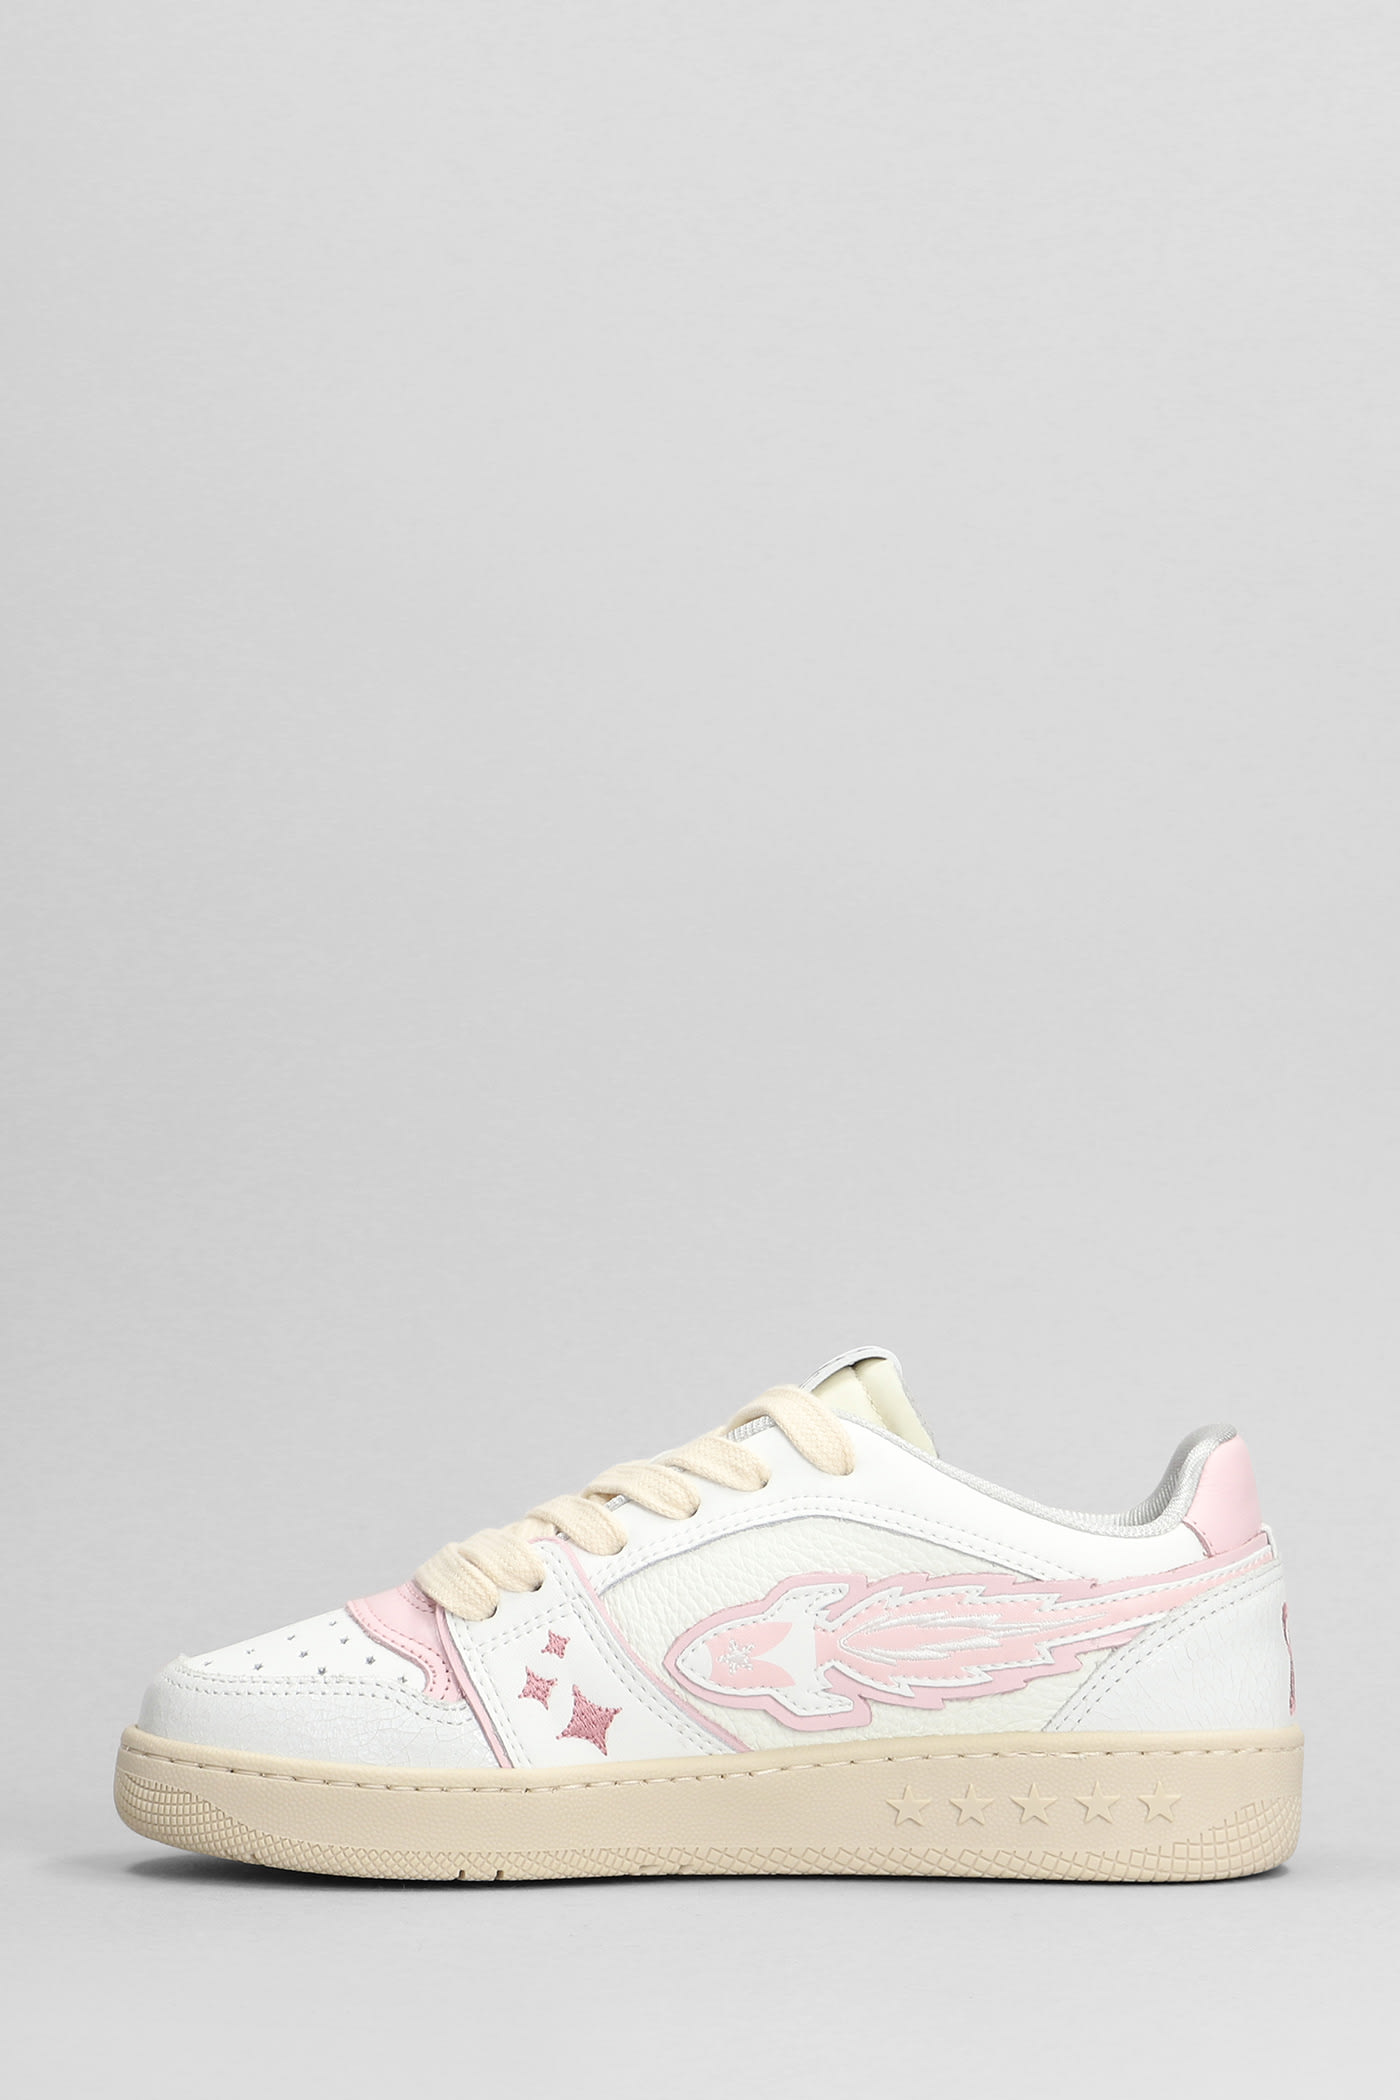 Shop Enterprise Japan Sneakers In White Leather In White And Pink